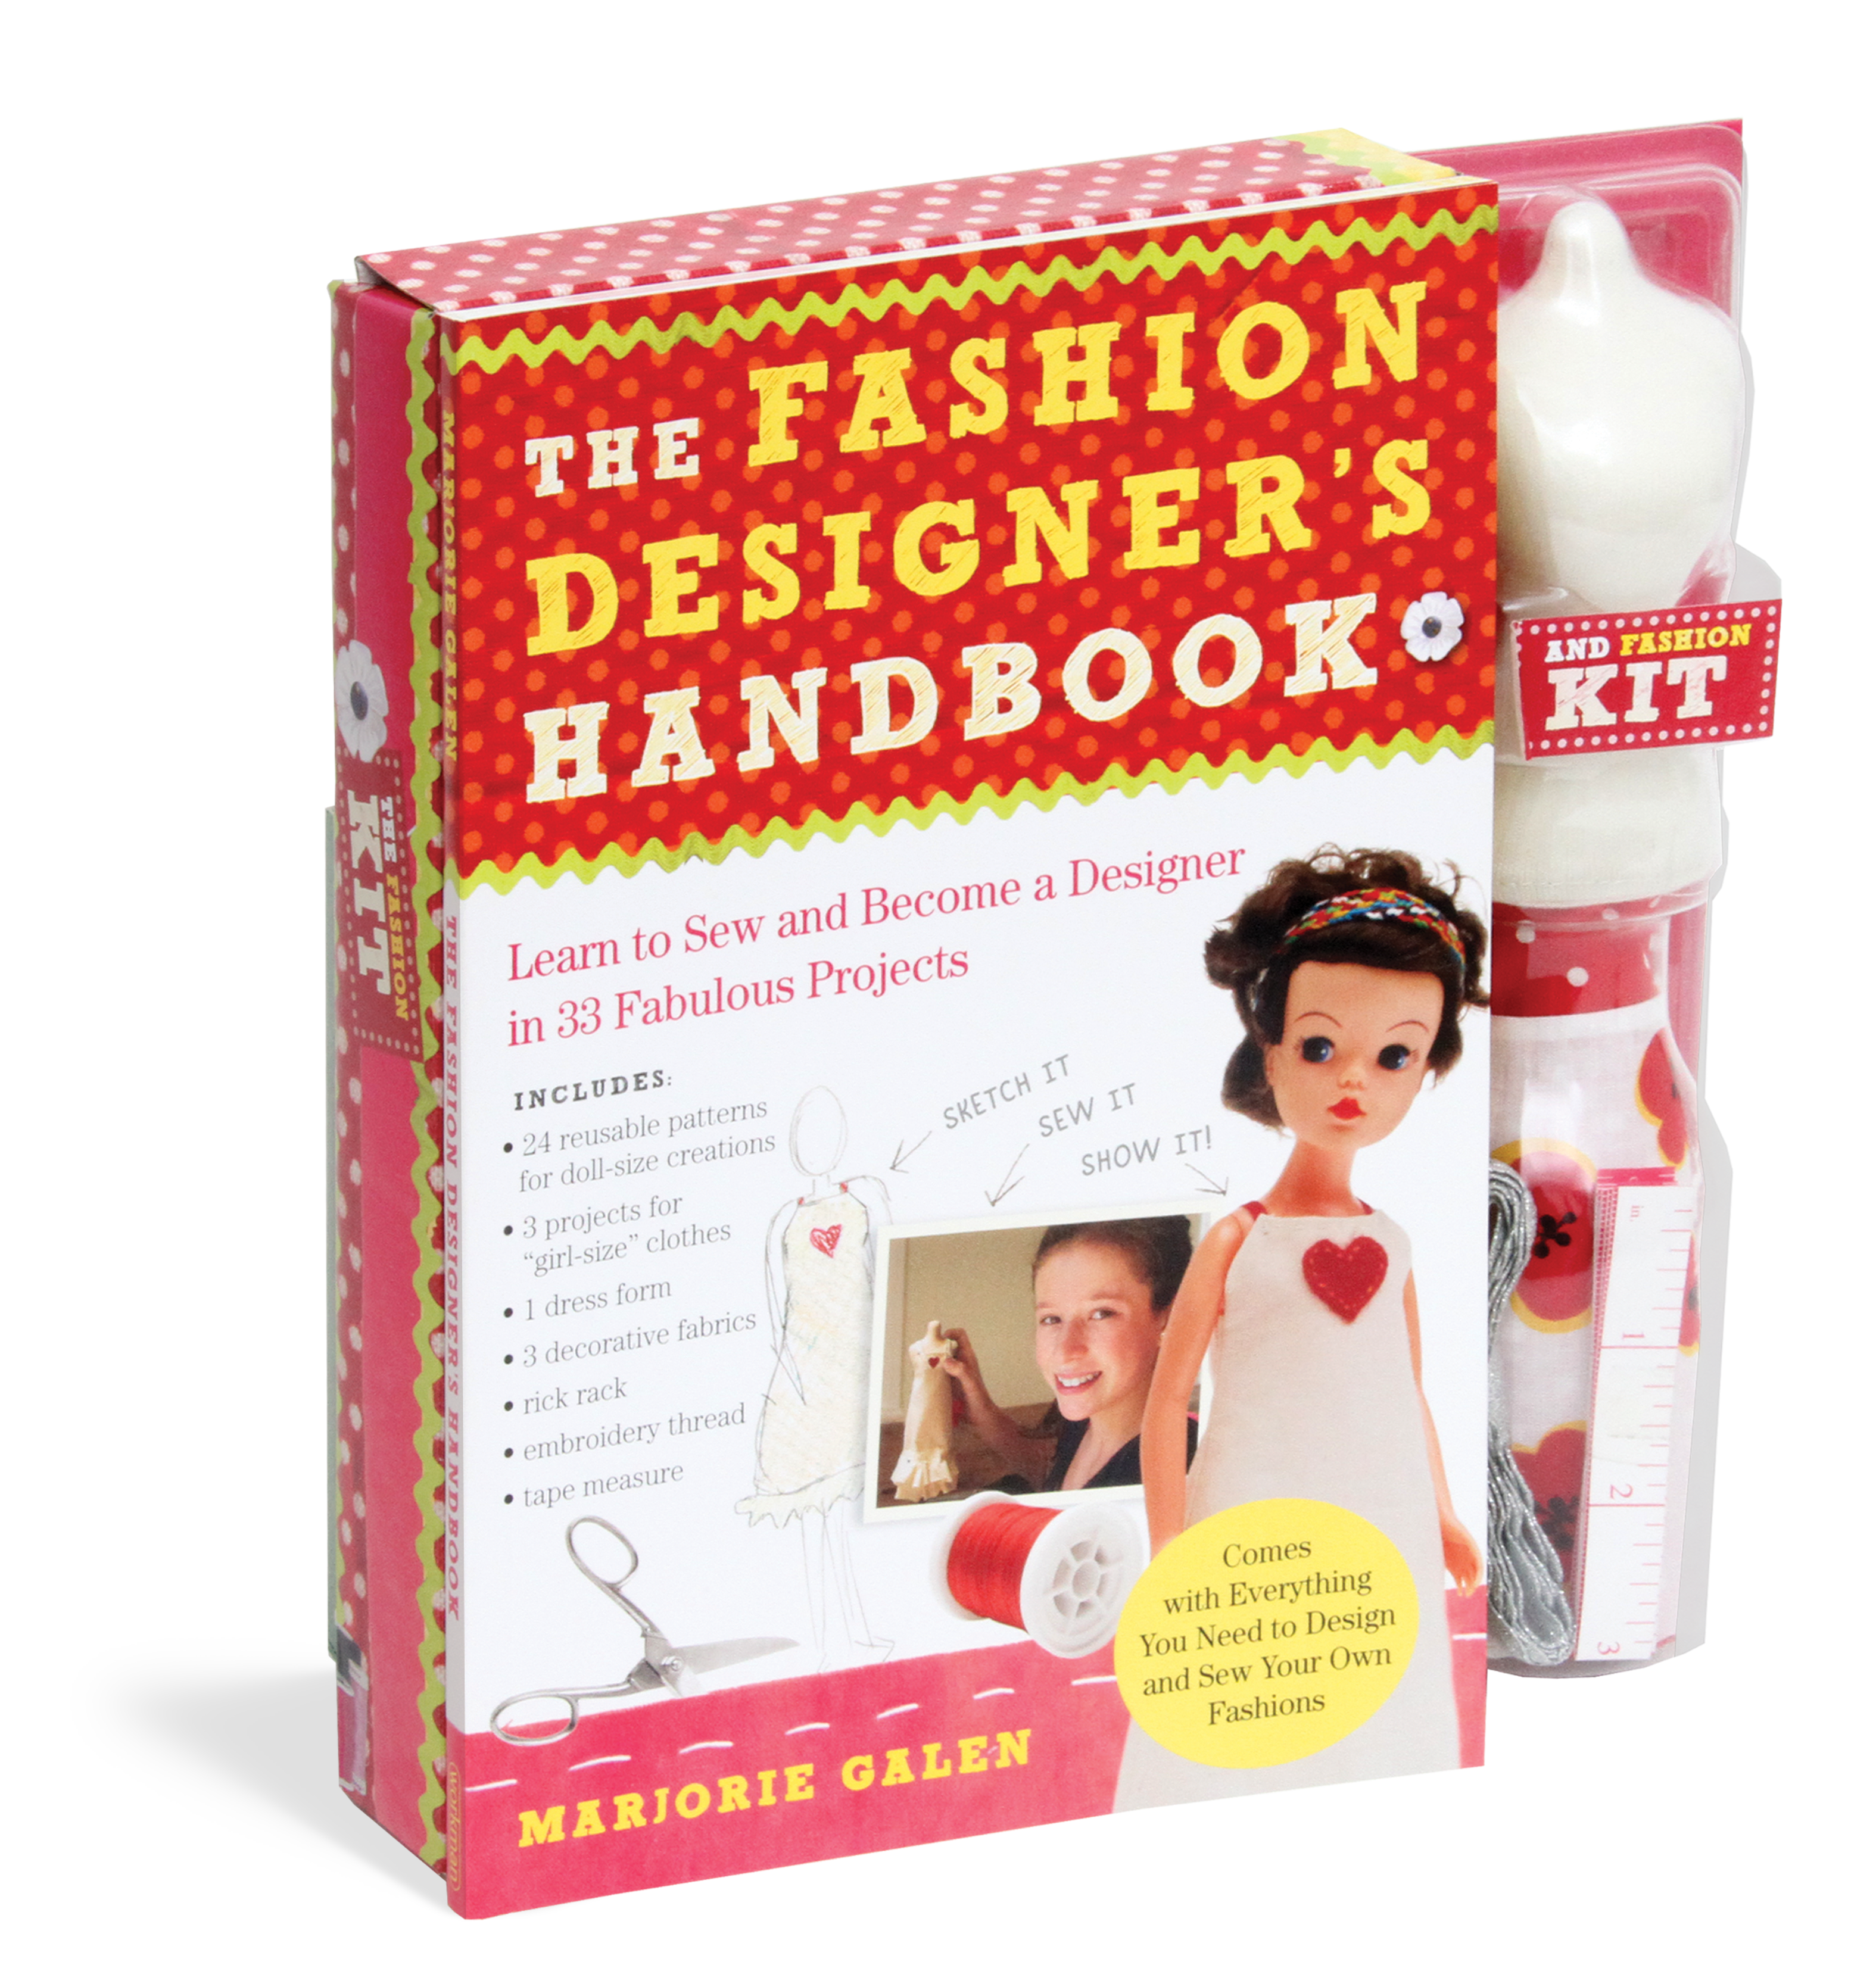 The Fashion Designers Handbook Fashion Kit Learn to Sew and Become a
Designer in 33 Fabulous Projects Epub-Ebook